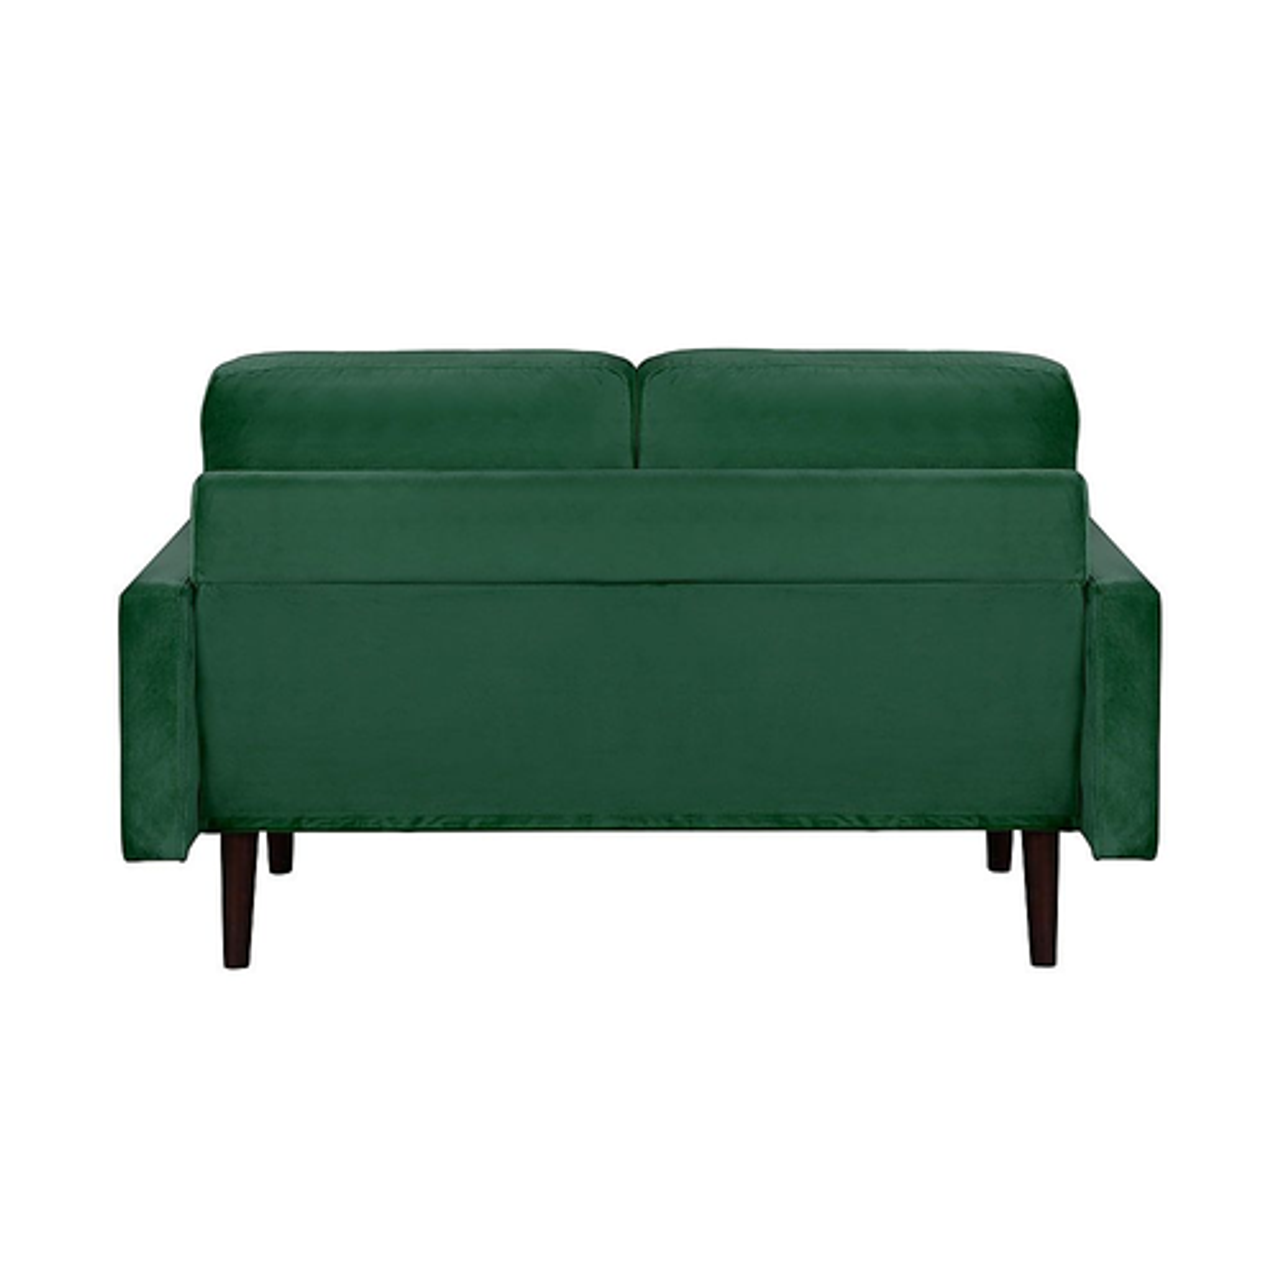 Lifestyle Solutions - MOLLY LOVESEAT MF GR25 NB (KM25-51) - Green